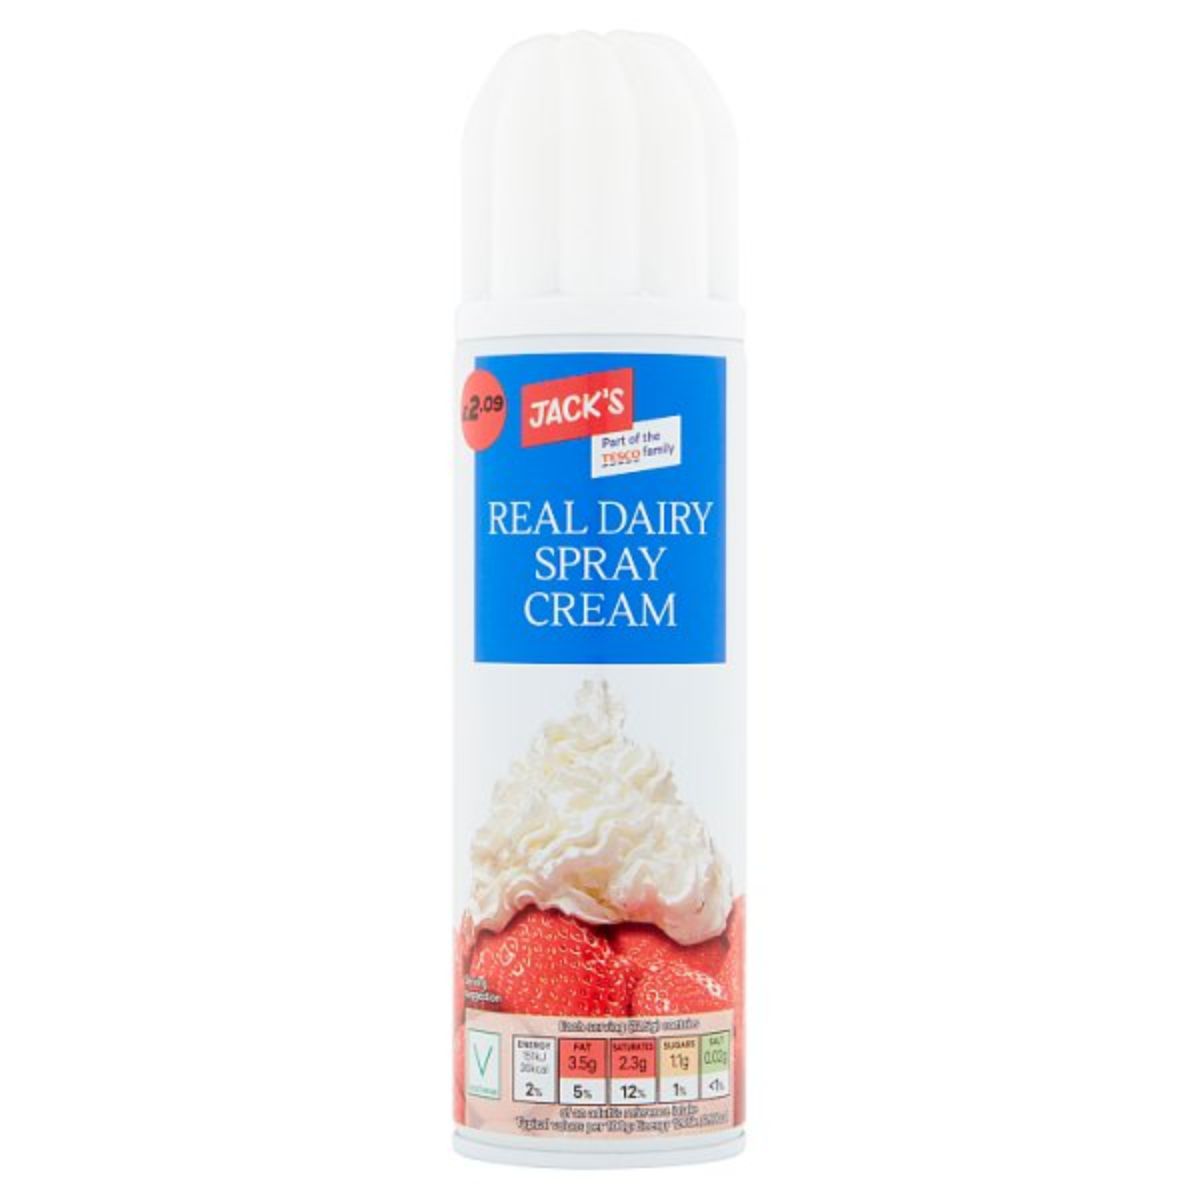 A bottle of Jacks - Real Dairy Spray cream - 250ml on a white background.